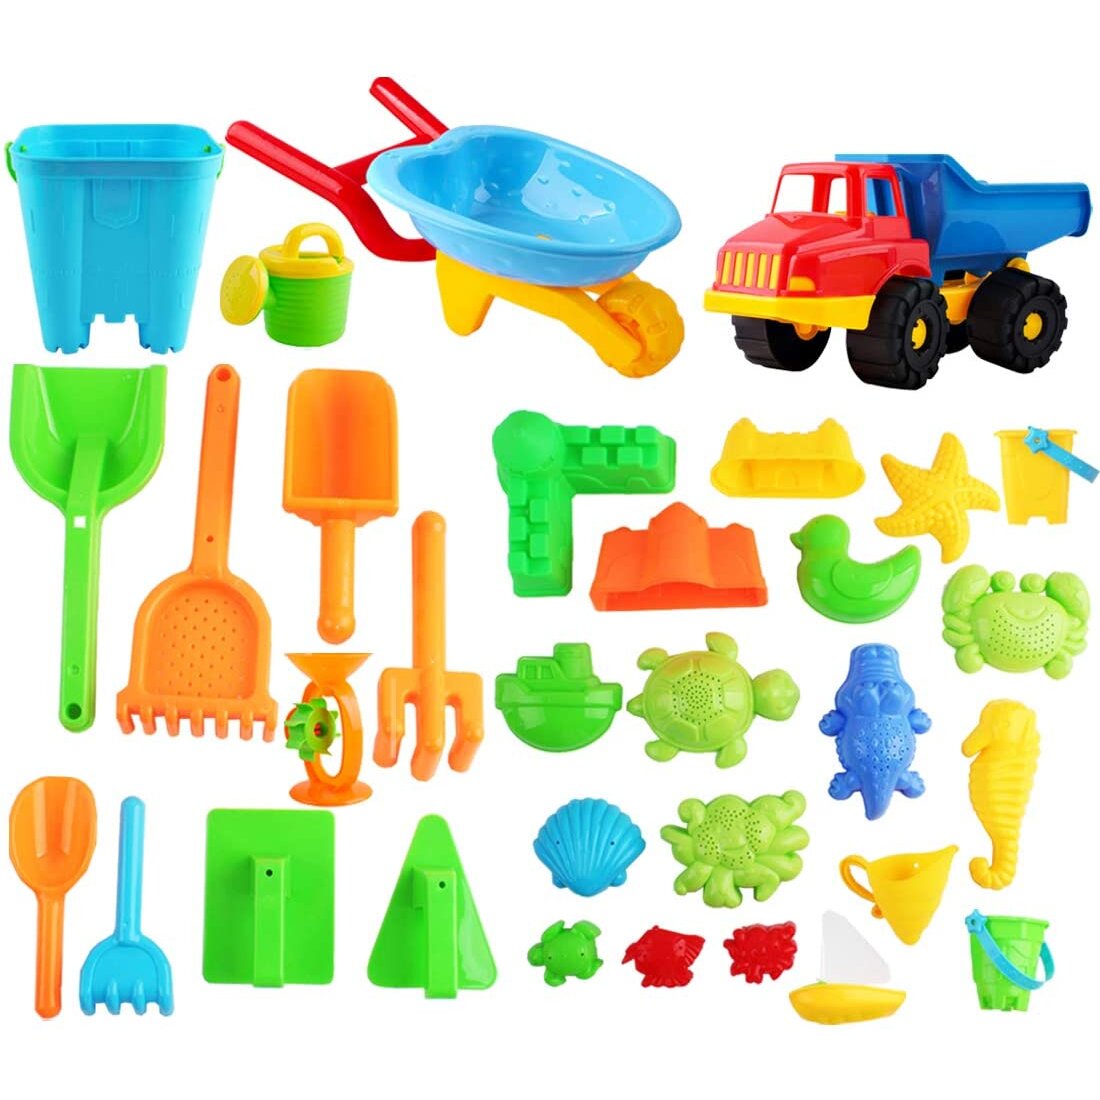 deAO Beach Toy Set with Variety of Sand and Over 30 Water Accessories Great Gift for Summer